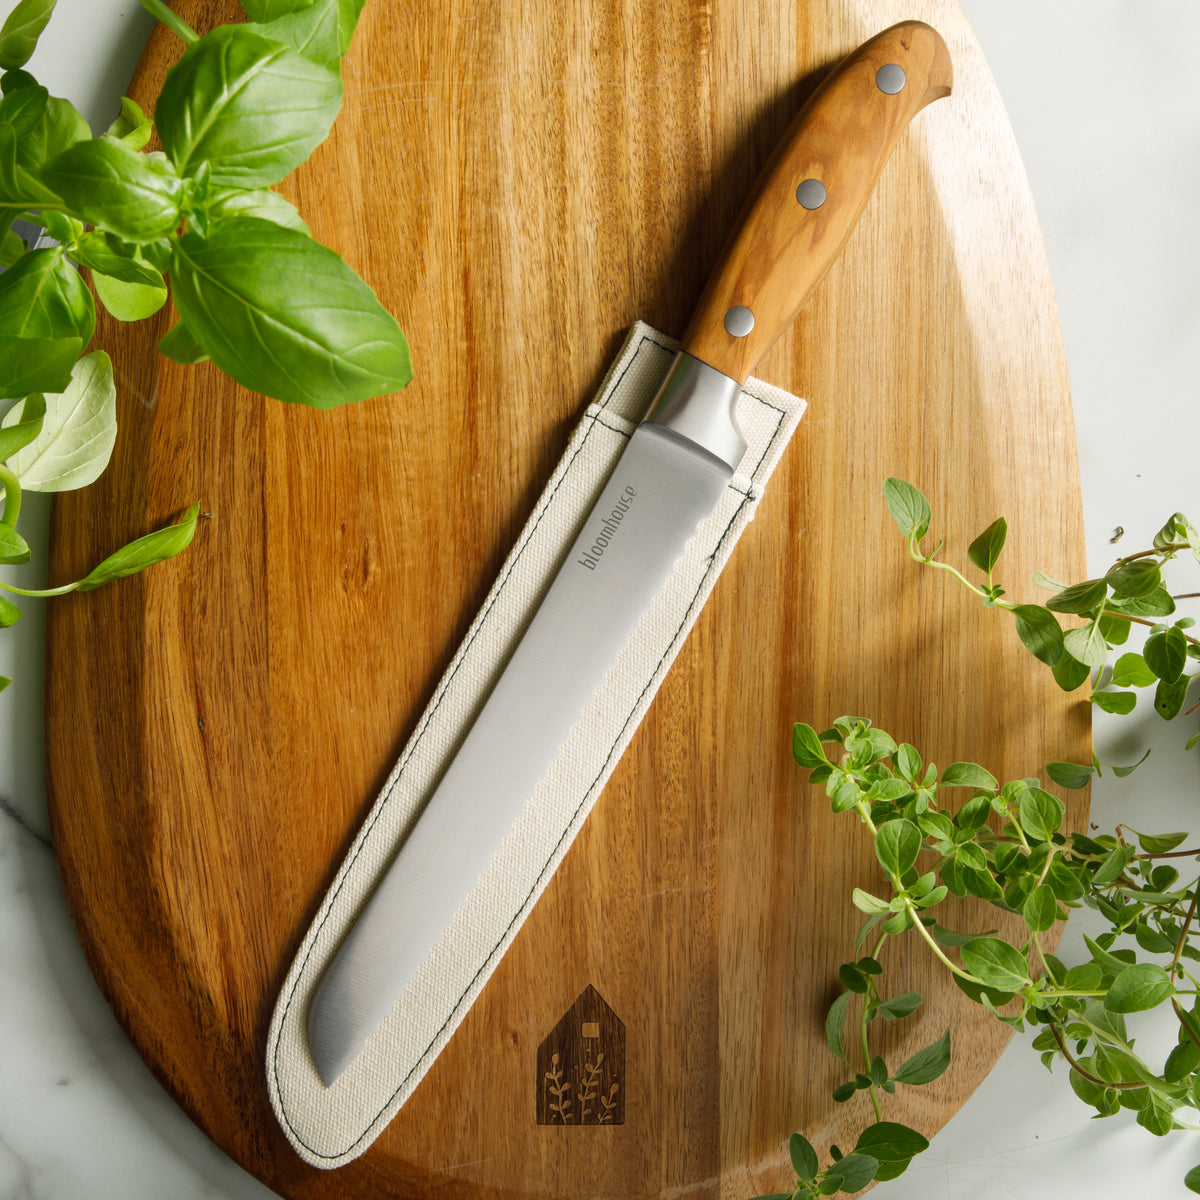 Bloomhouse 8 Inch Bread Knife made with Olive Wood and German